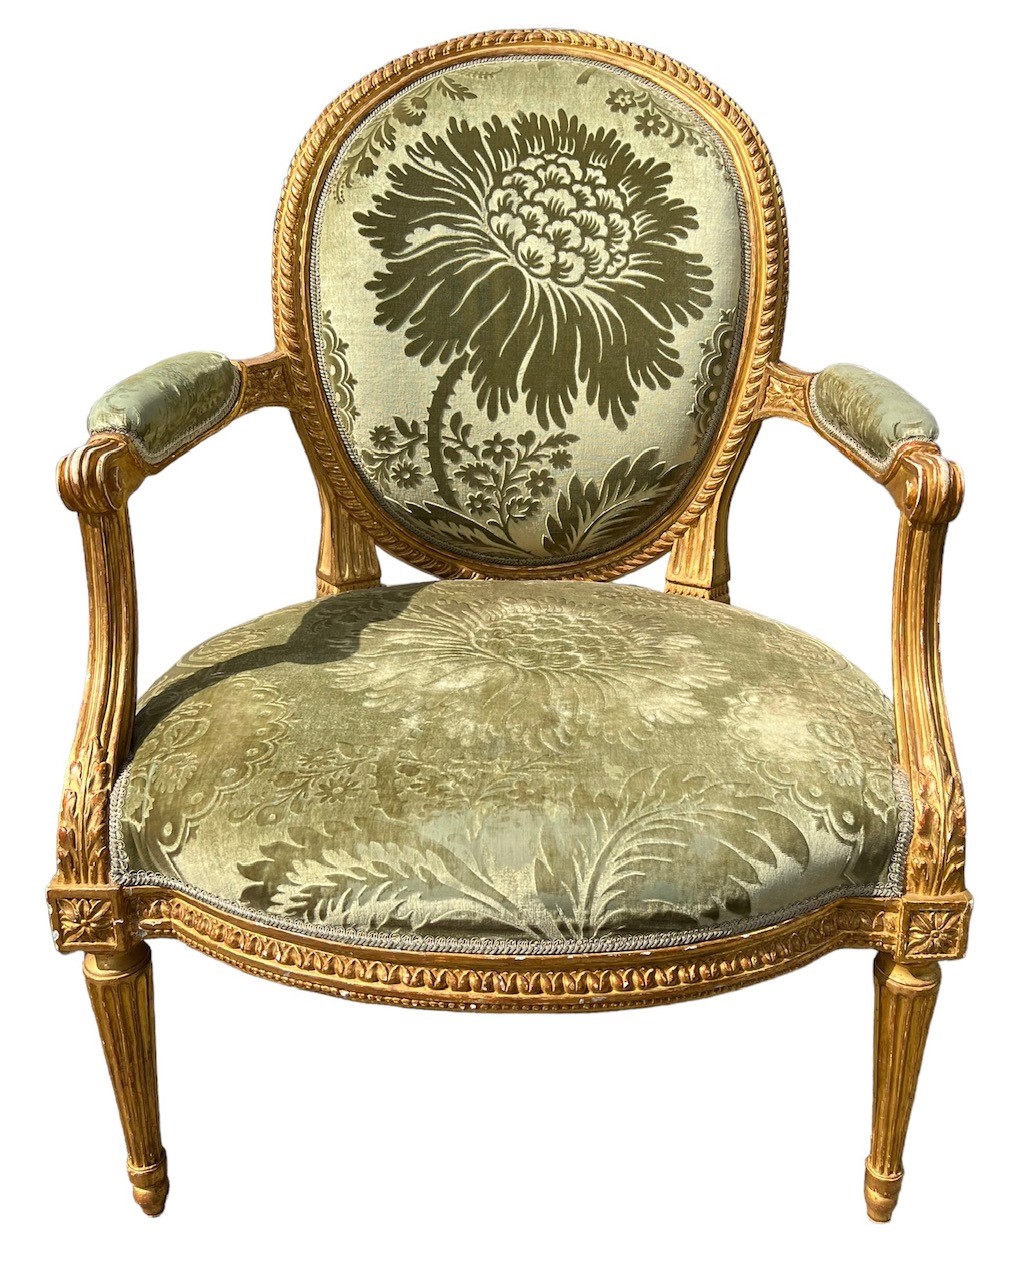 LOUIS DELANOIS, AN 18TH CENTURY FRENCH LOUIS XVI CARVED GILTWOOD ARMCHAIR With oval padded back,